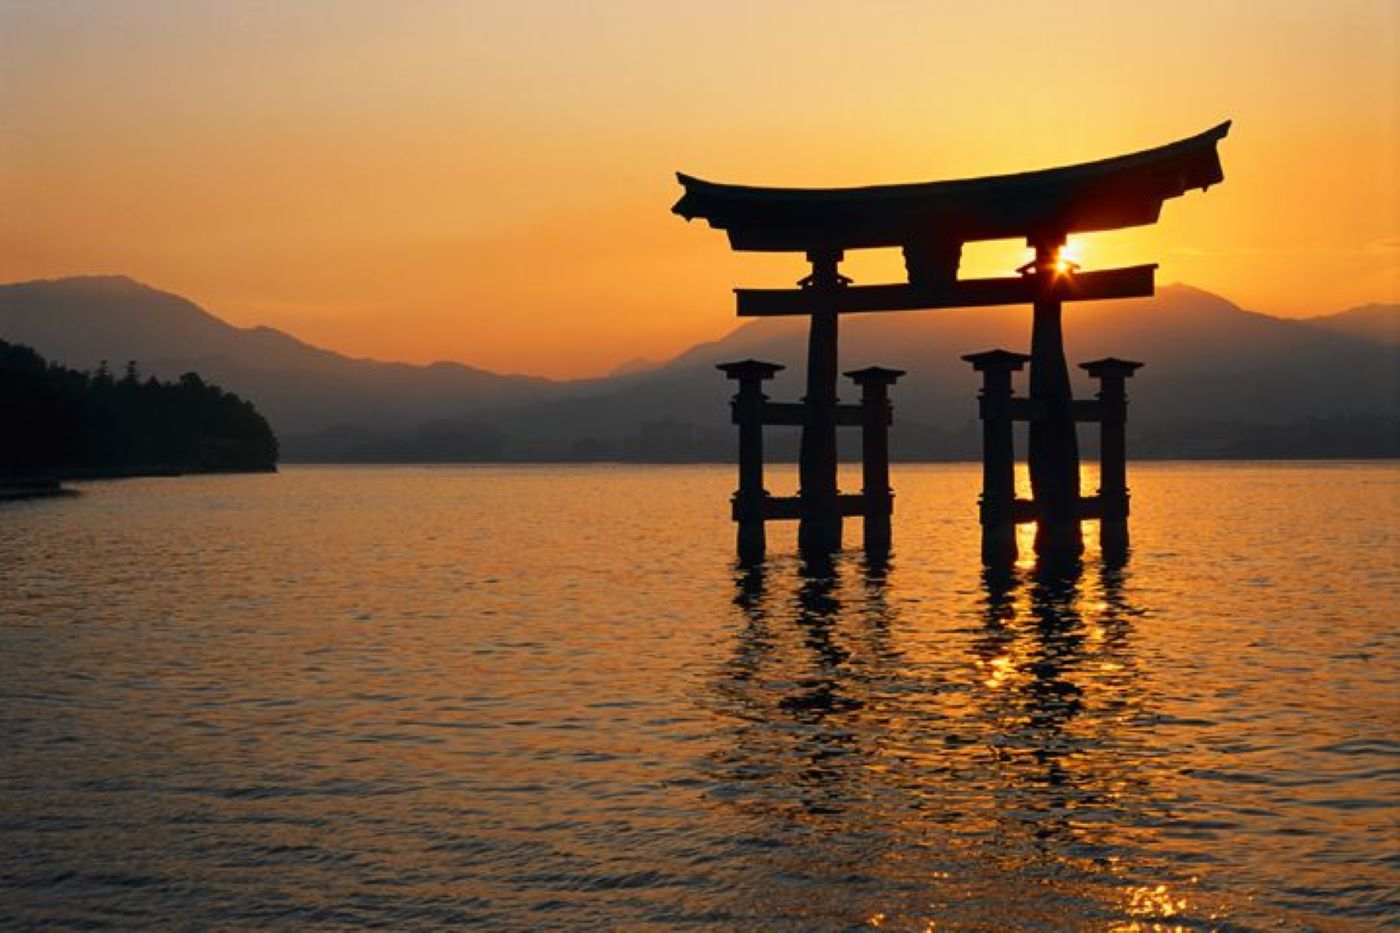 sunset over water in japan with structure in water